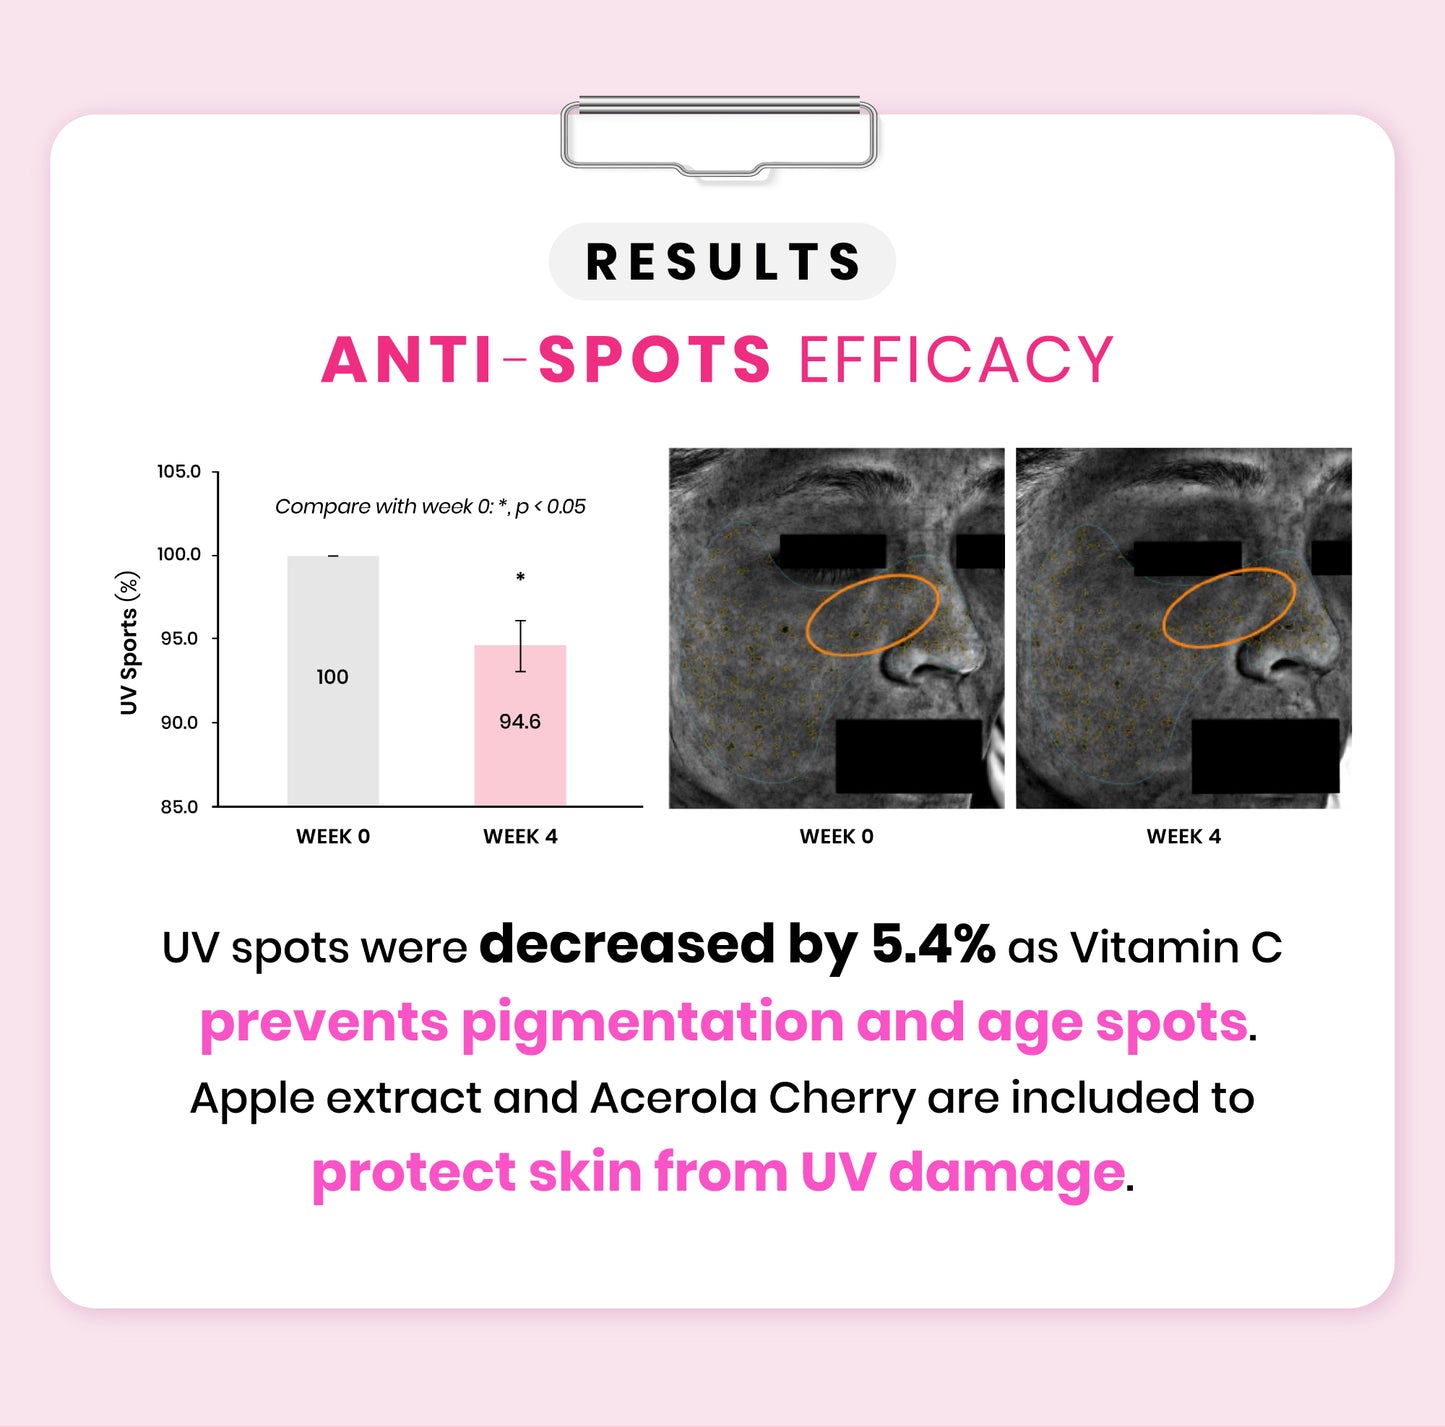 Avalon Stemcell Beauty Drink  able to reduce pigmentation and age spots. As shown, UV spots were decreased by 5.4% as Vitamin C prevents pigmentation and age spots. Apple extract and Acerola cherry are included to protect skin from UV damage. The effects can be seen within one month!